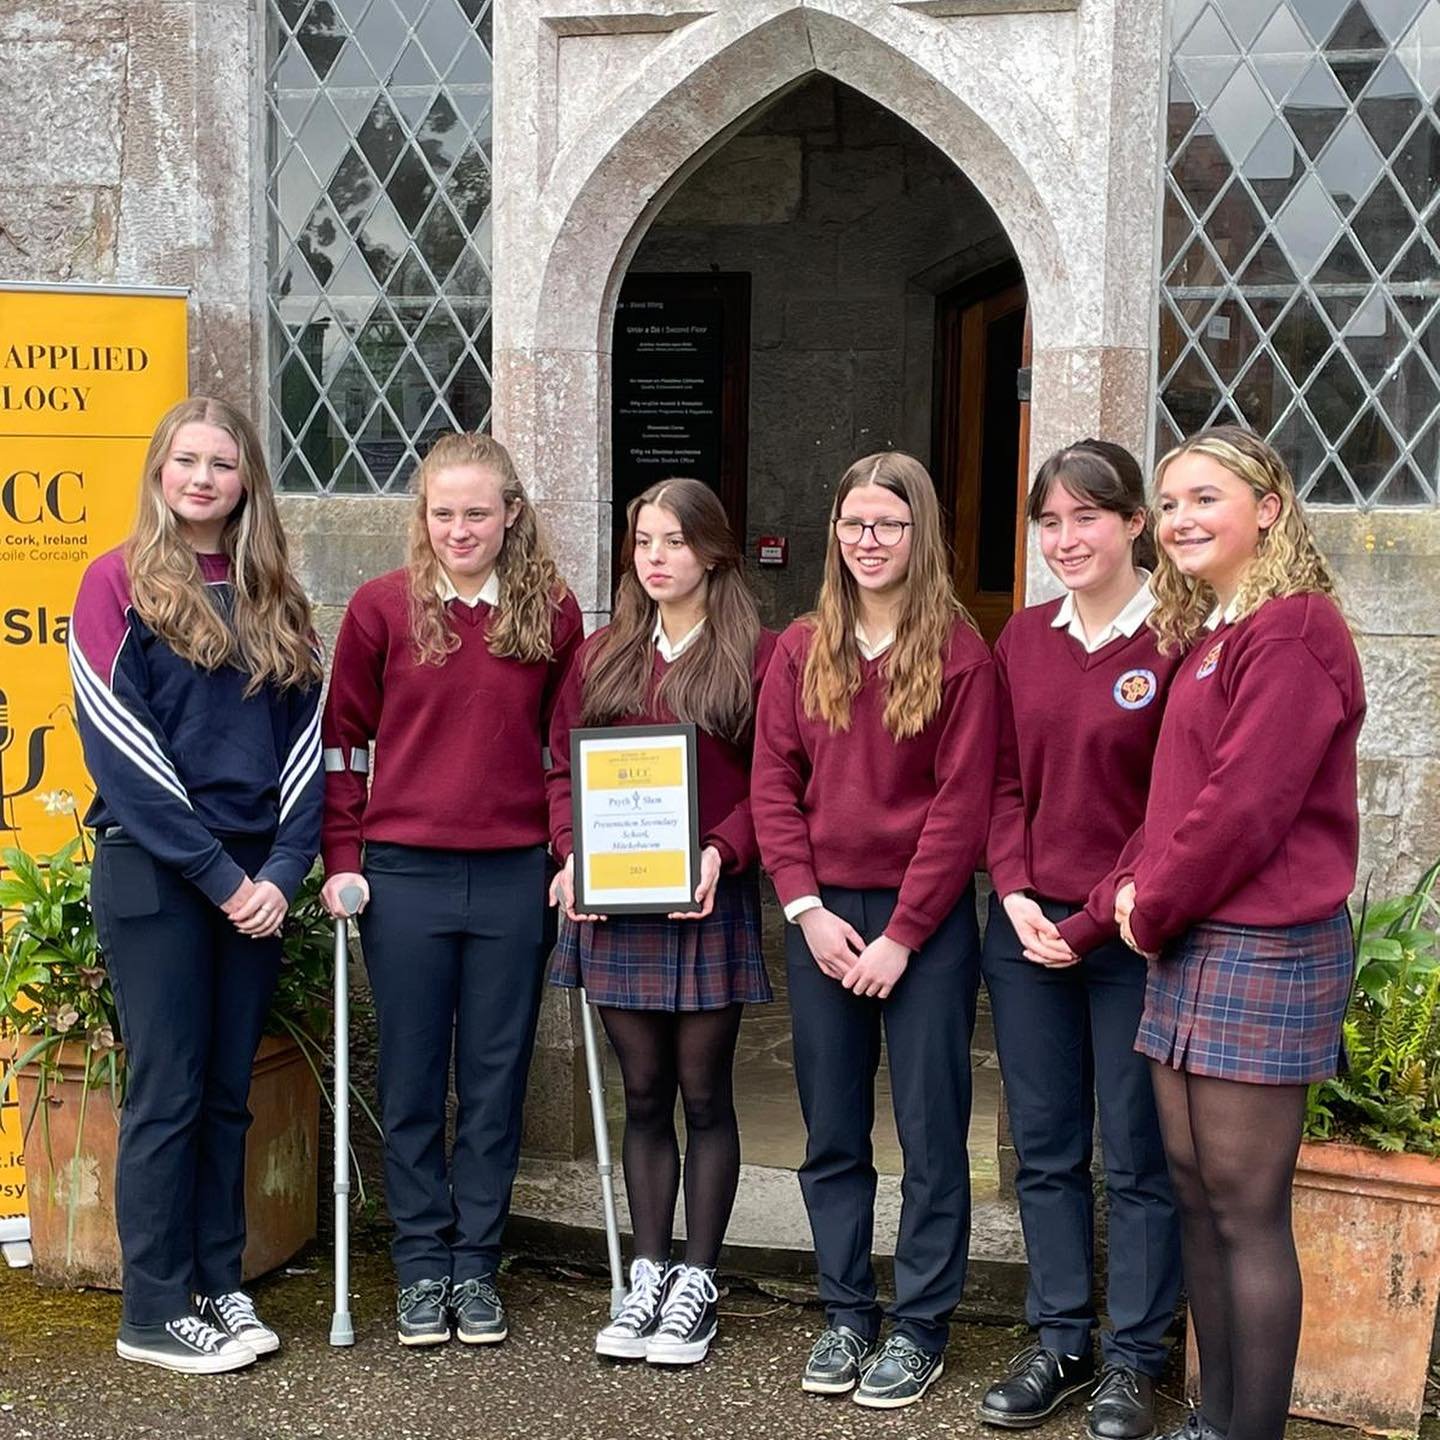 😃PSYCH SLAM 😀Well done to our TY team in their achievement at Psych Slam today. They achieved an audience choice award for their presentation on mindfulness. The PsychSlam competition is organised by the School of Applied Psychology at UCC. It give